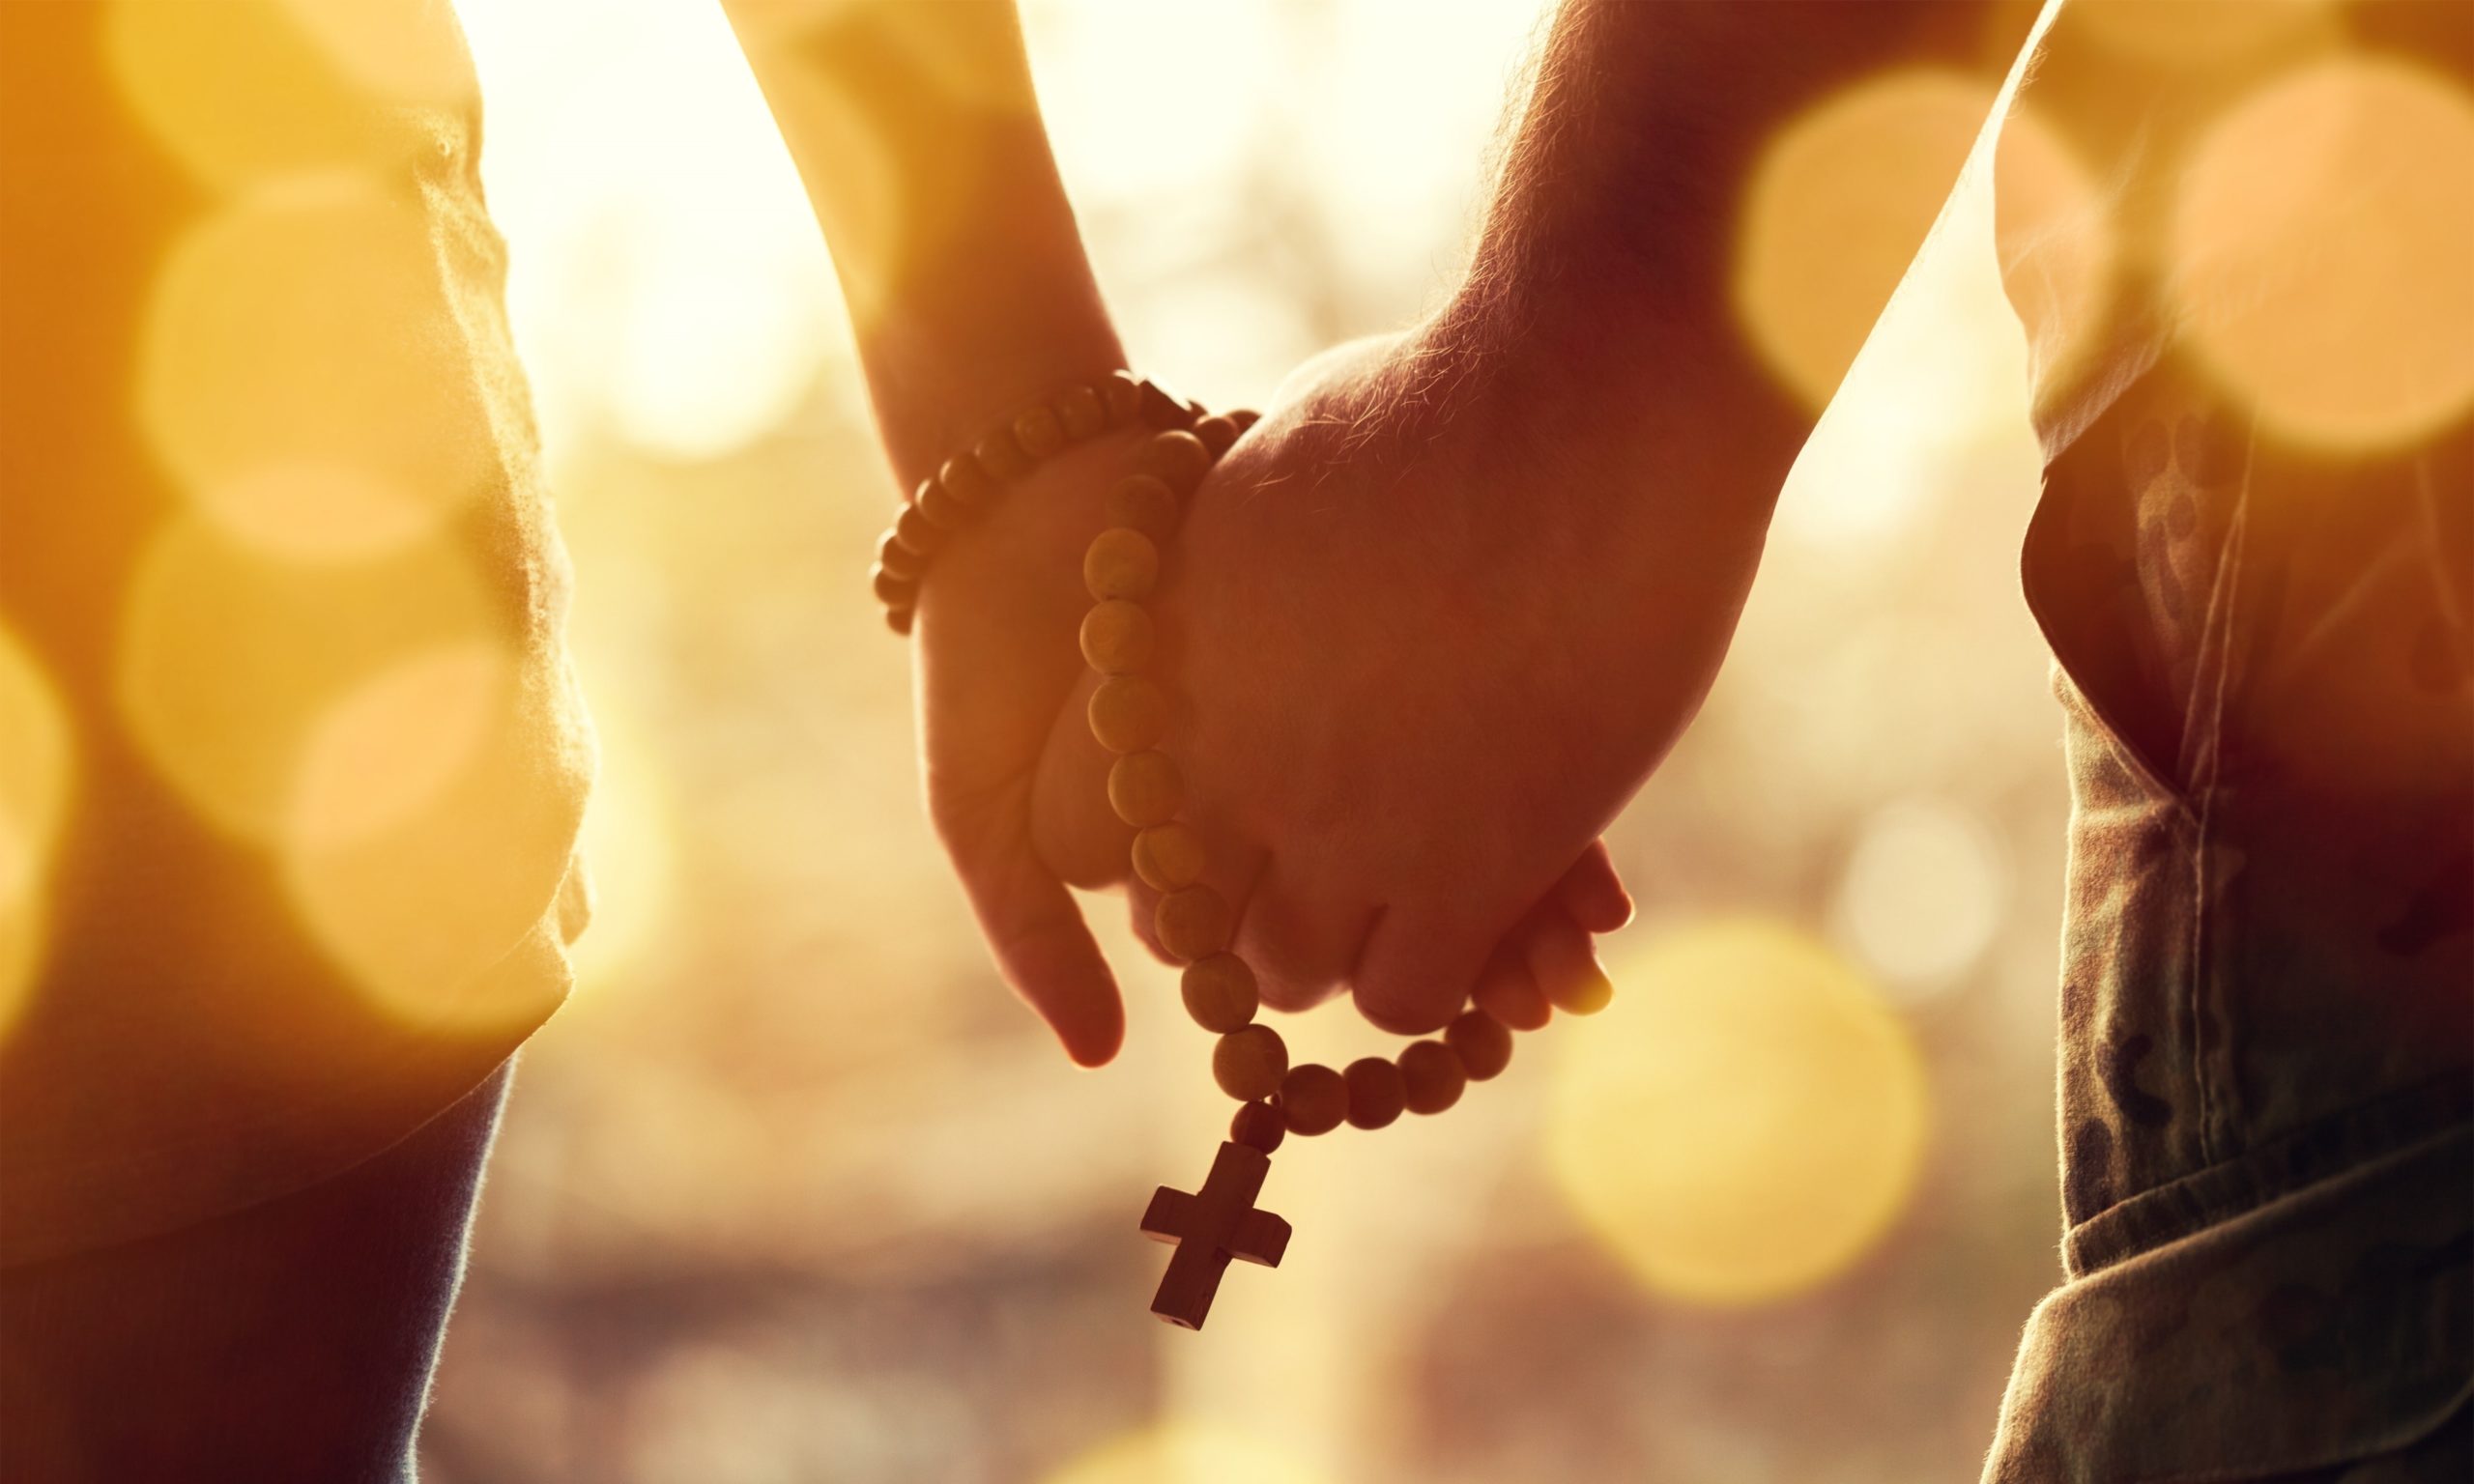 Christian Dating Couple praying together. Holding rosary in hand.